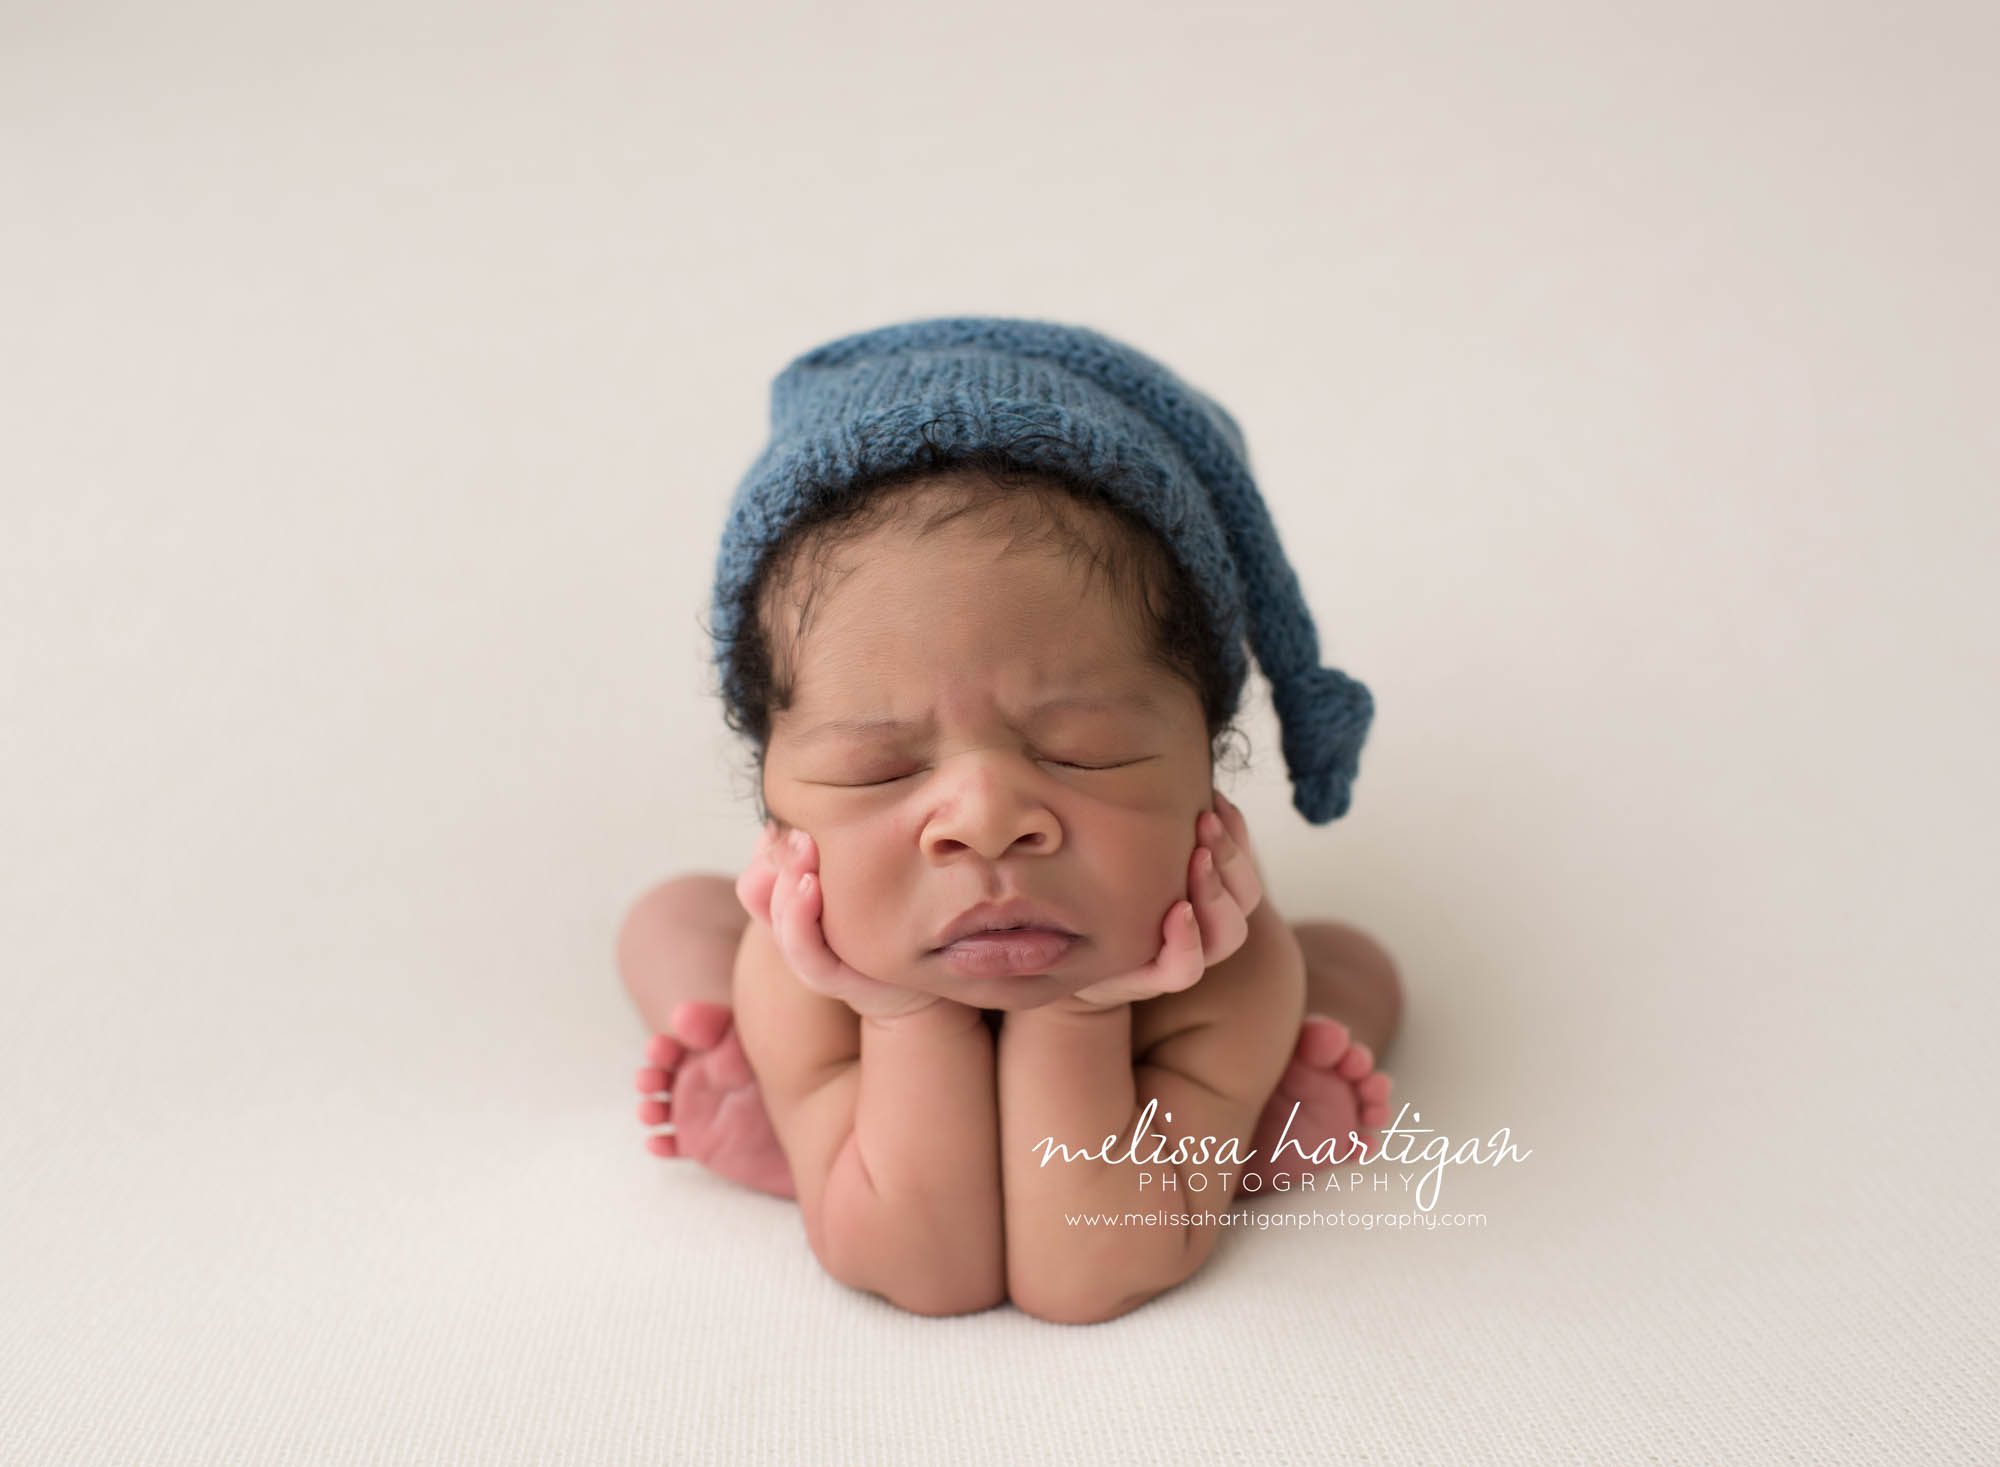 Melissa Hartigan Photography Connecticut Maternity and Newborn CT Photographer Coventry Ct Middlefield CT baby Fairfield county Newborn pose baby boy in froggy pose wearing blue knitted hat